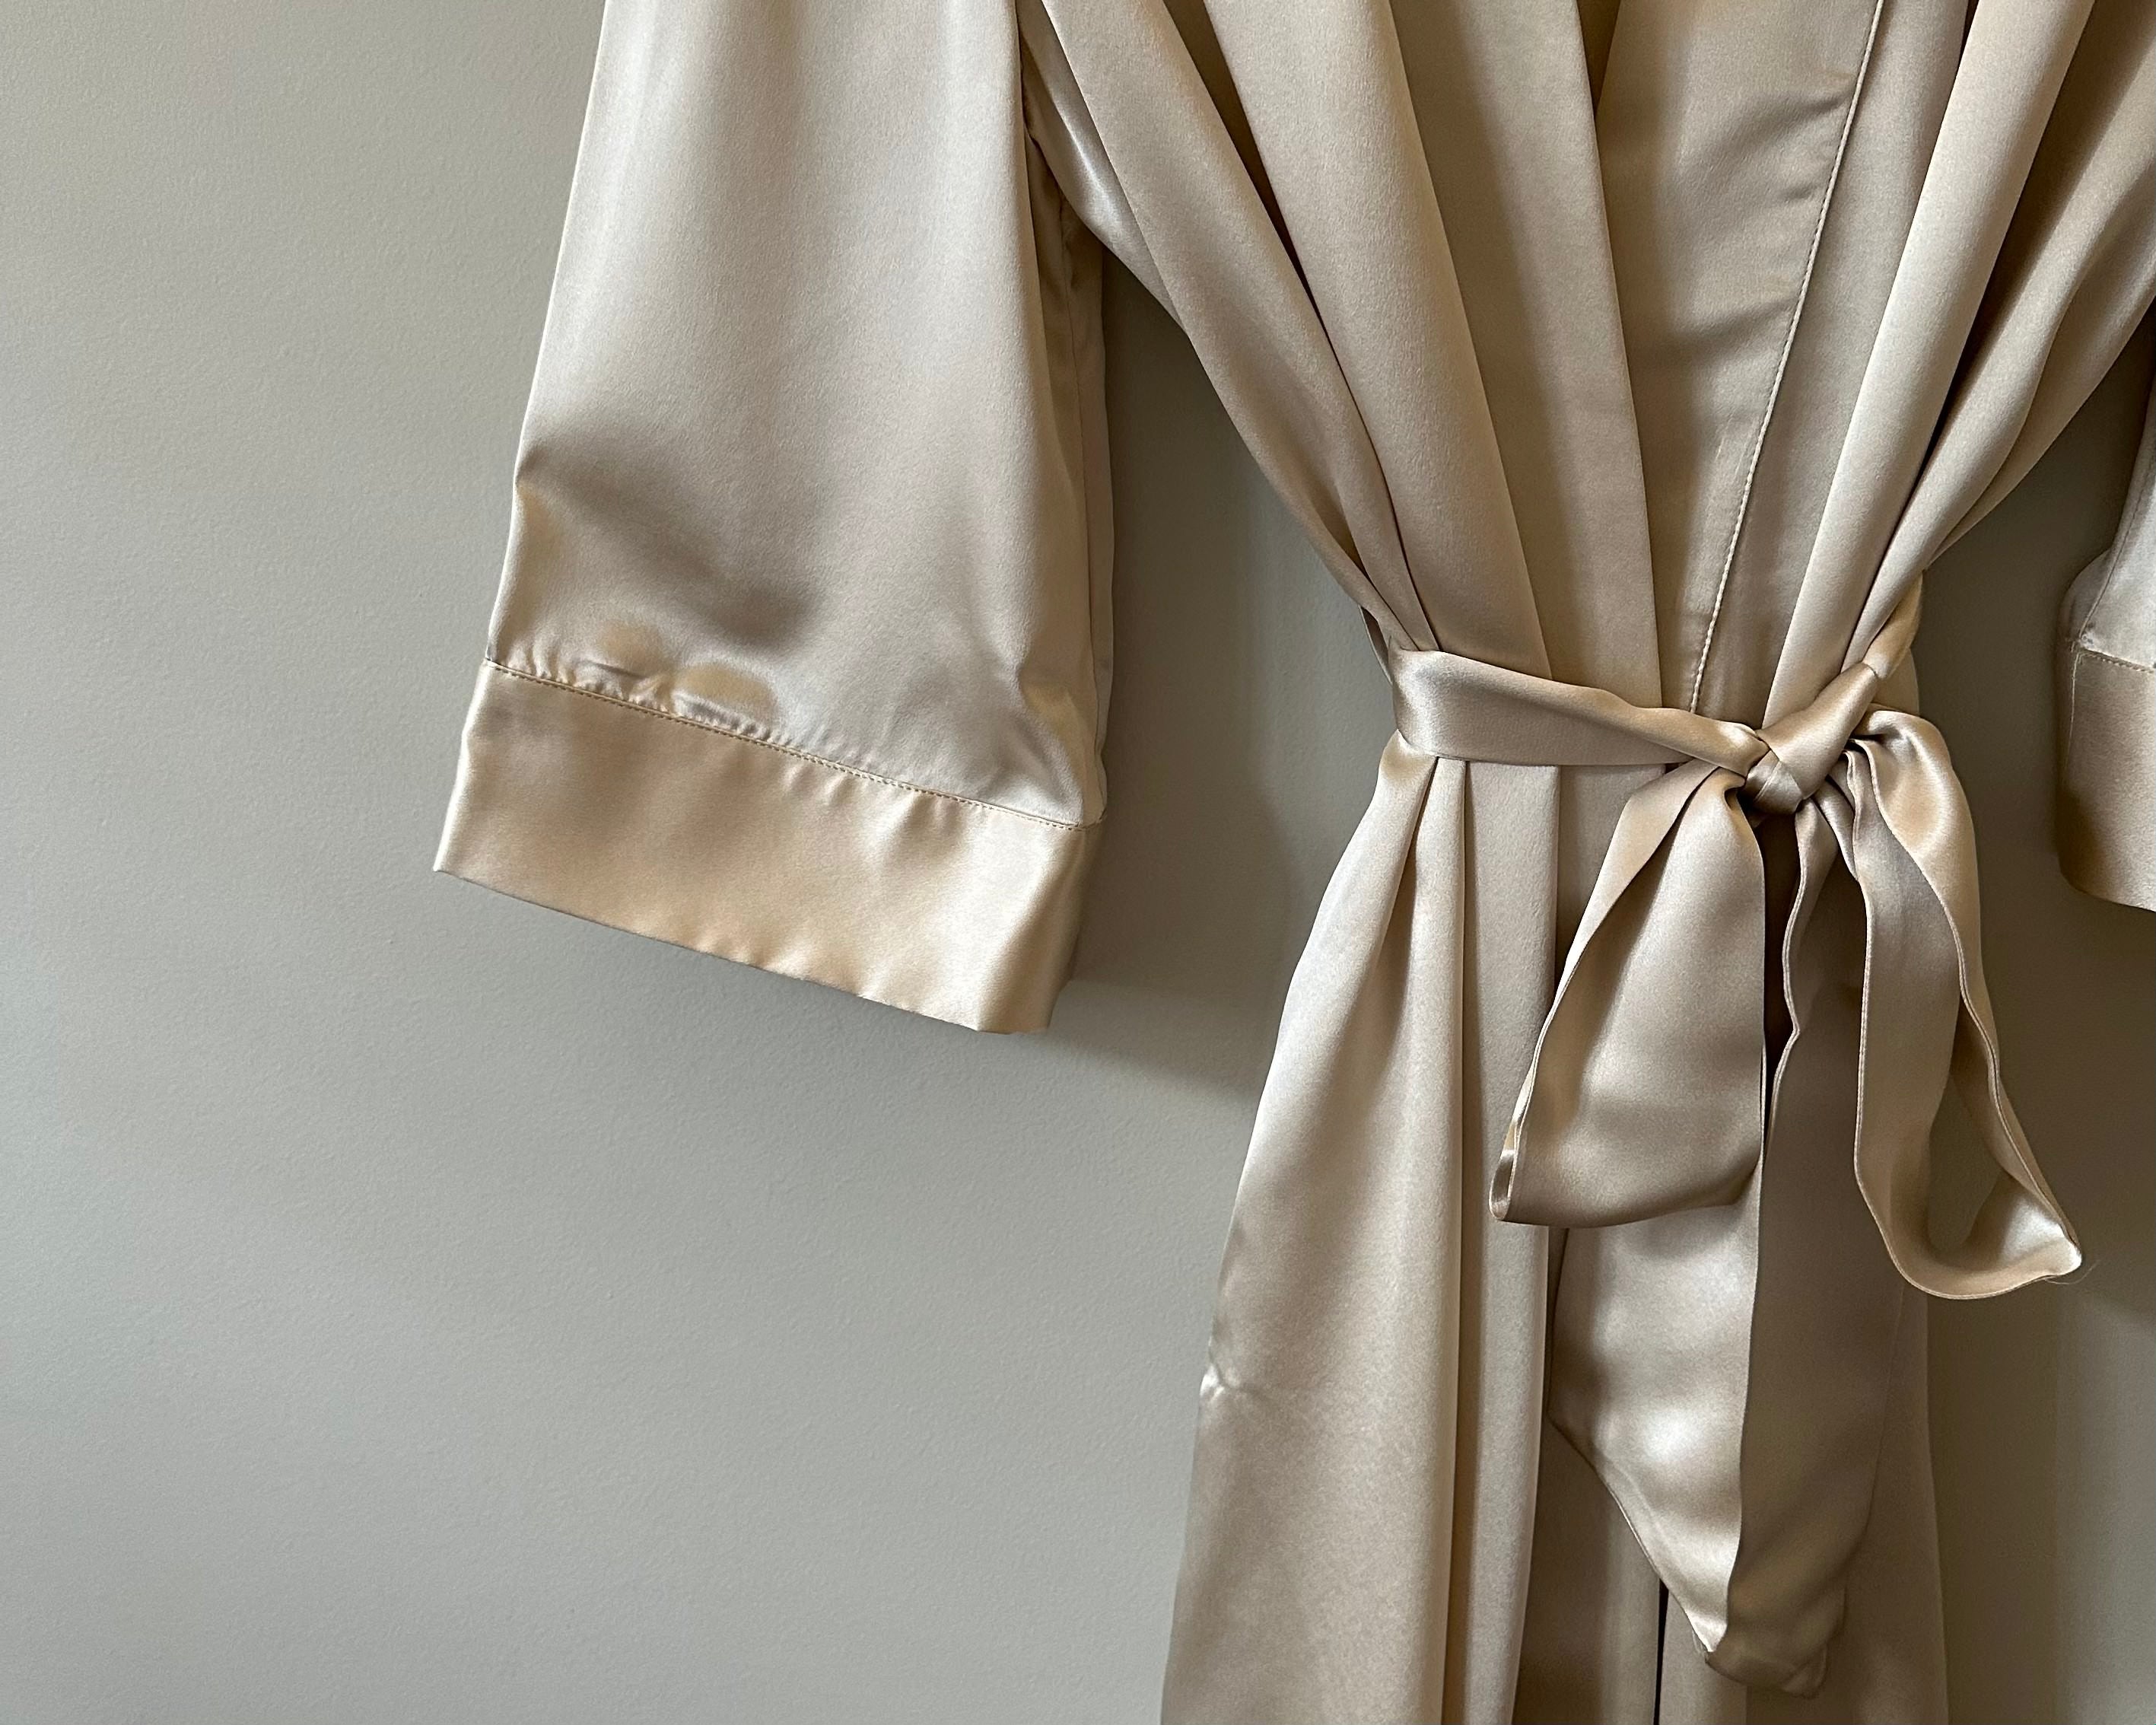 Meet our Pure Silk Robe: The Perfect Gift for a Bride to Be